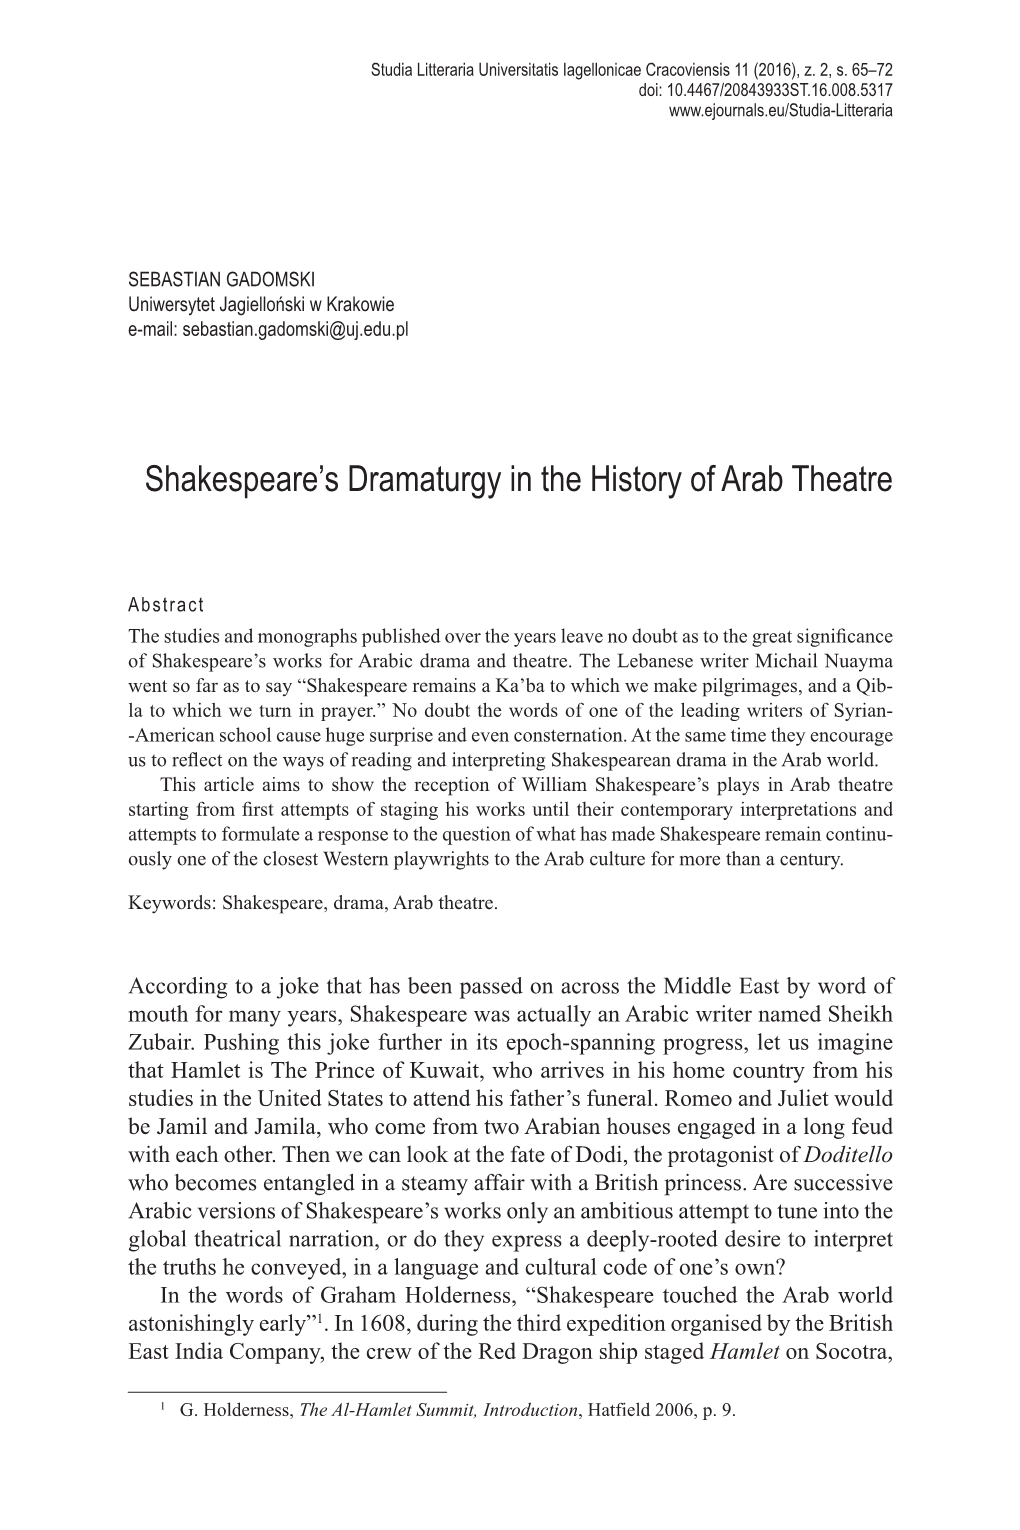 Shakespeare's Dramaturgy in the History of Arab Theatre